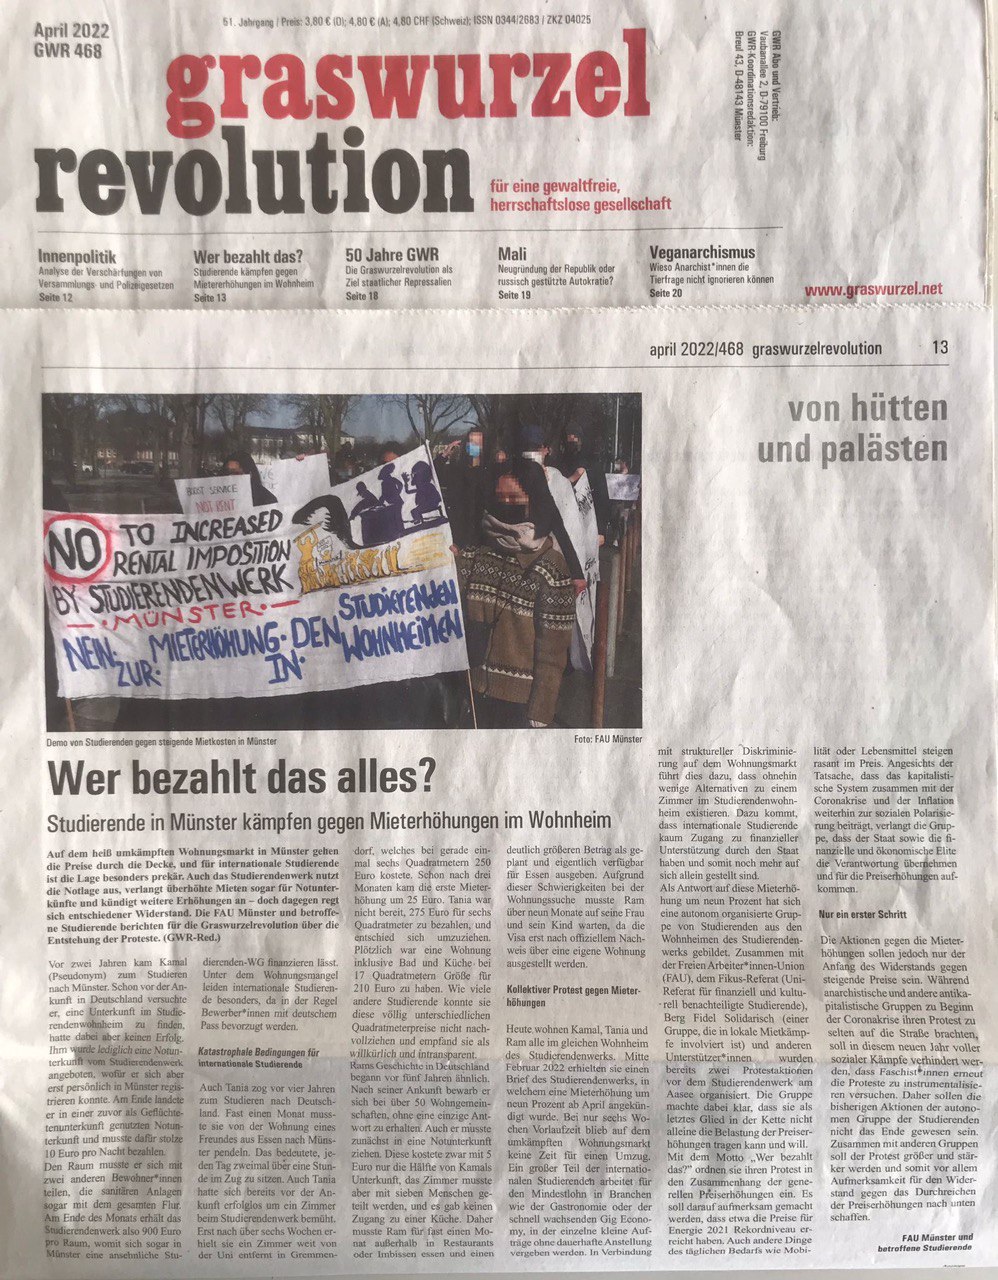 Published article in Graswurzelrevolution April 2022 issue about rent increase fight and systemic discrimination of studierendenwerk.